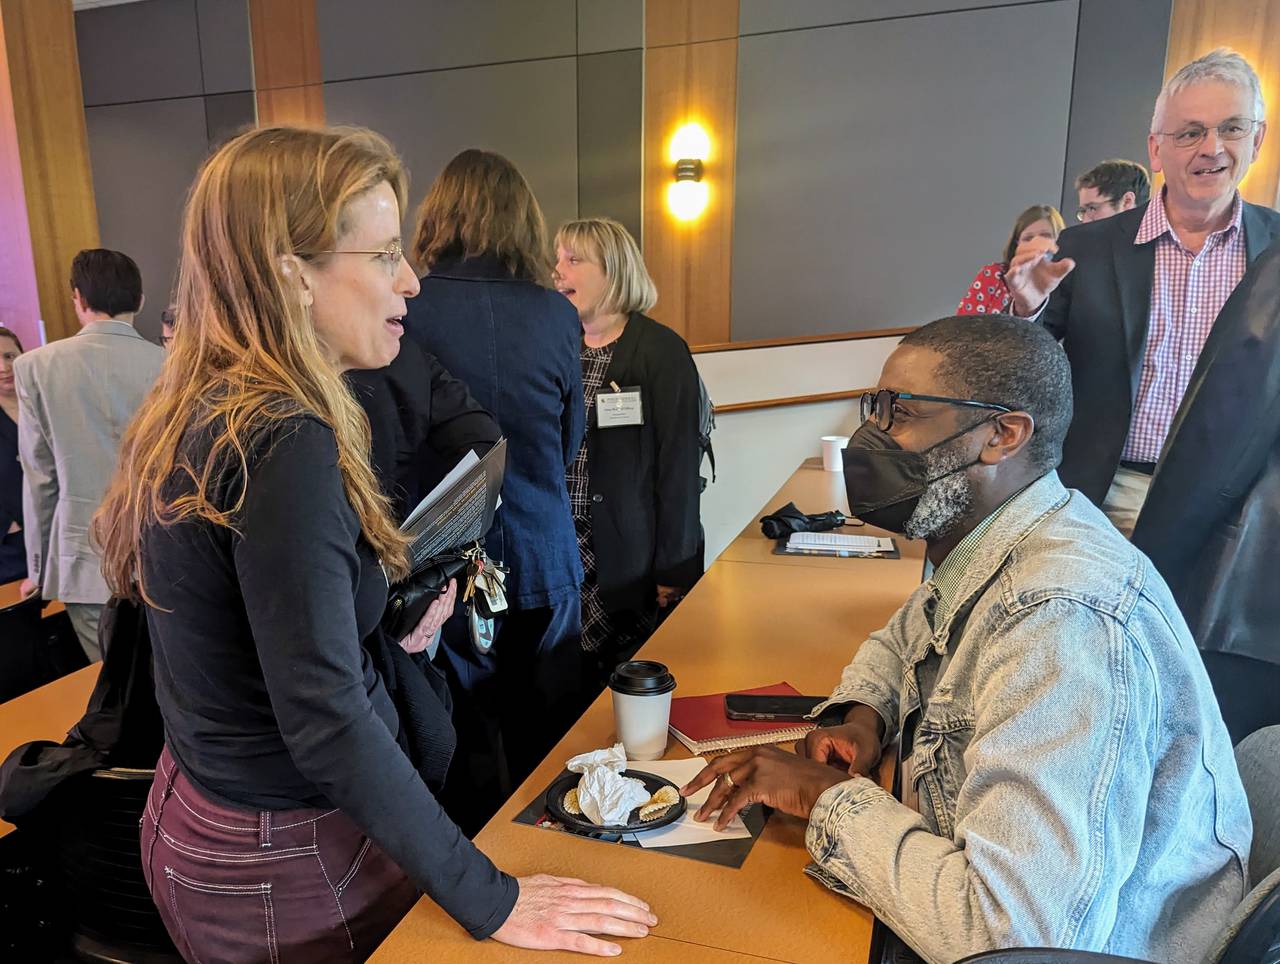 Kit Slack, editor of the Streetcar Suburbs News in Hyattsville, talks with Delonte Harrod of The Intersection talk about news in Prince George's County.